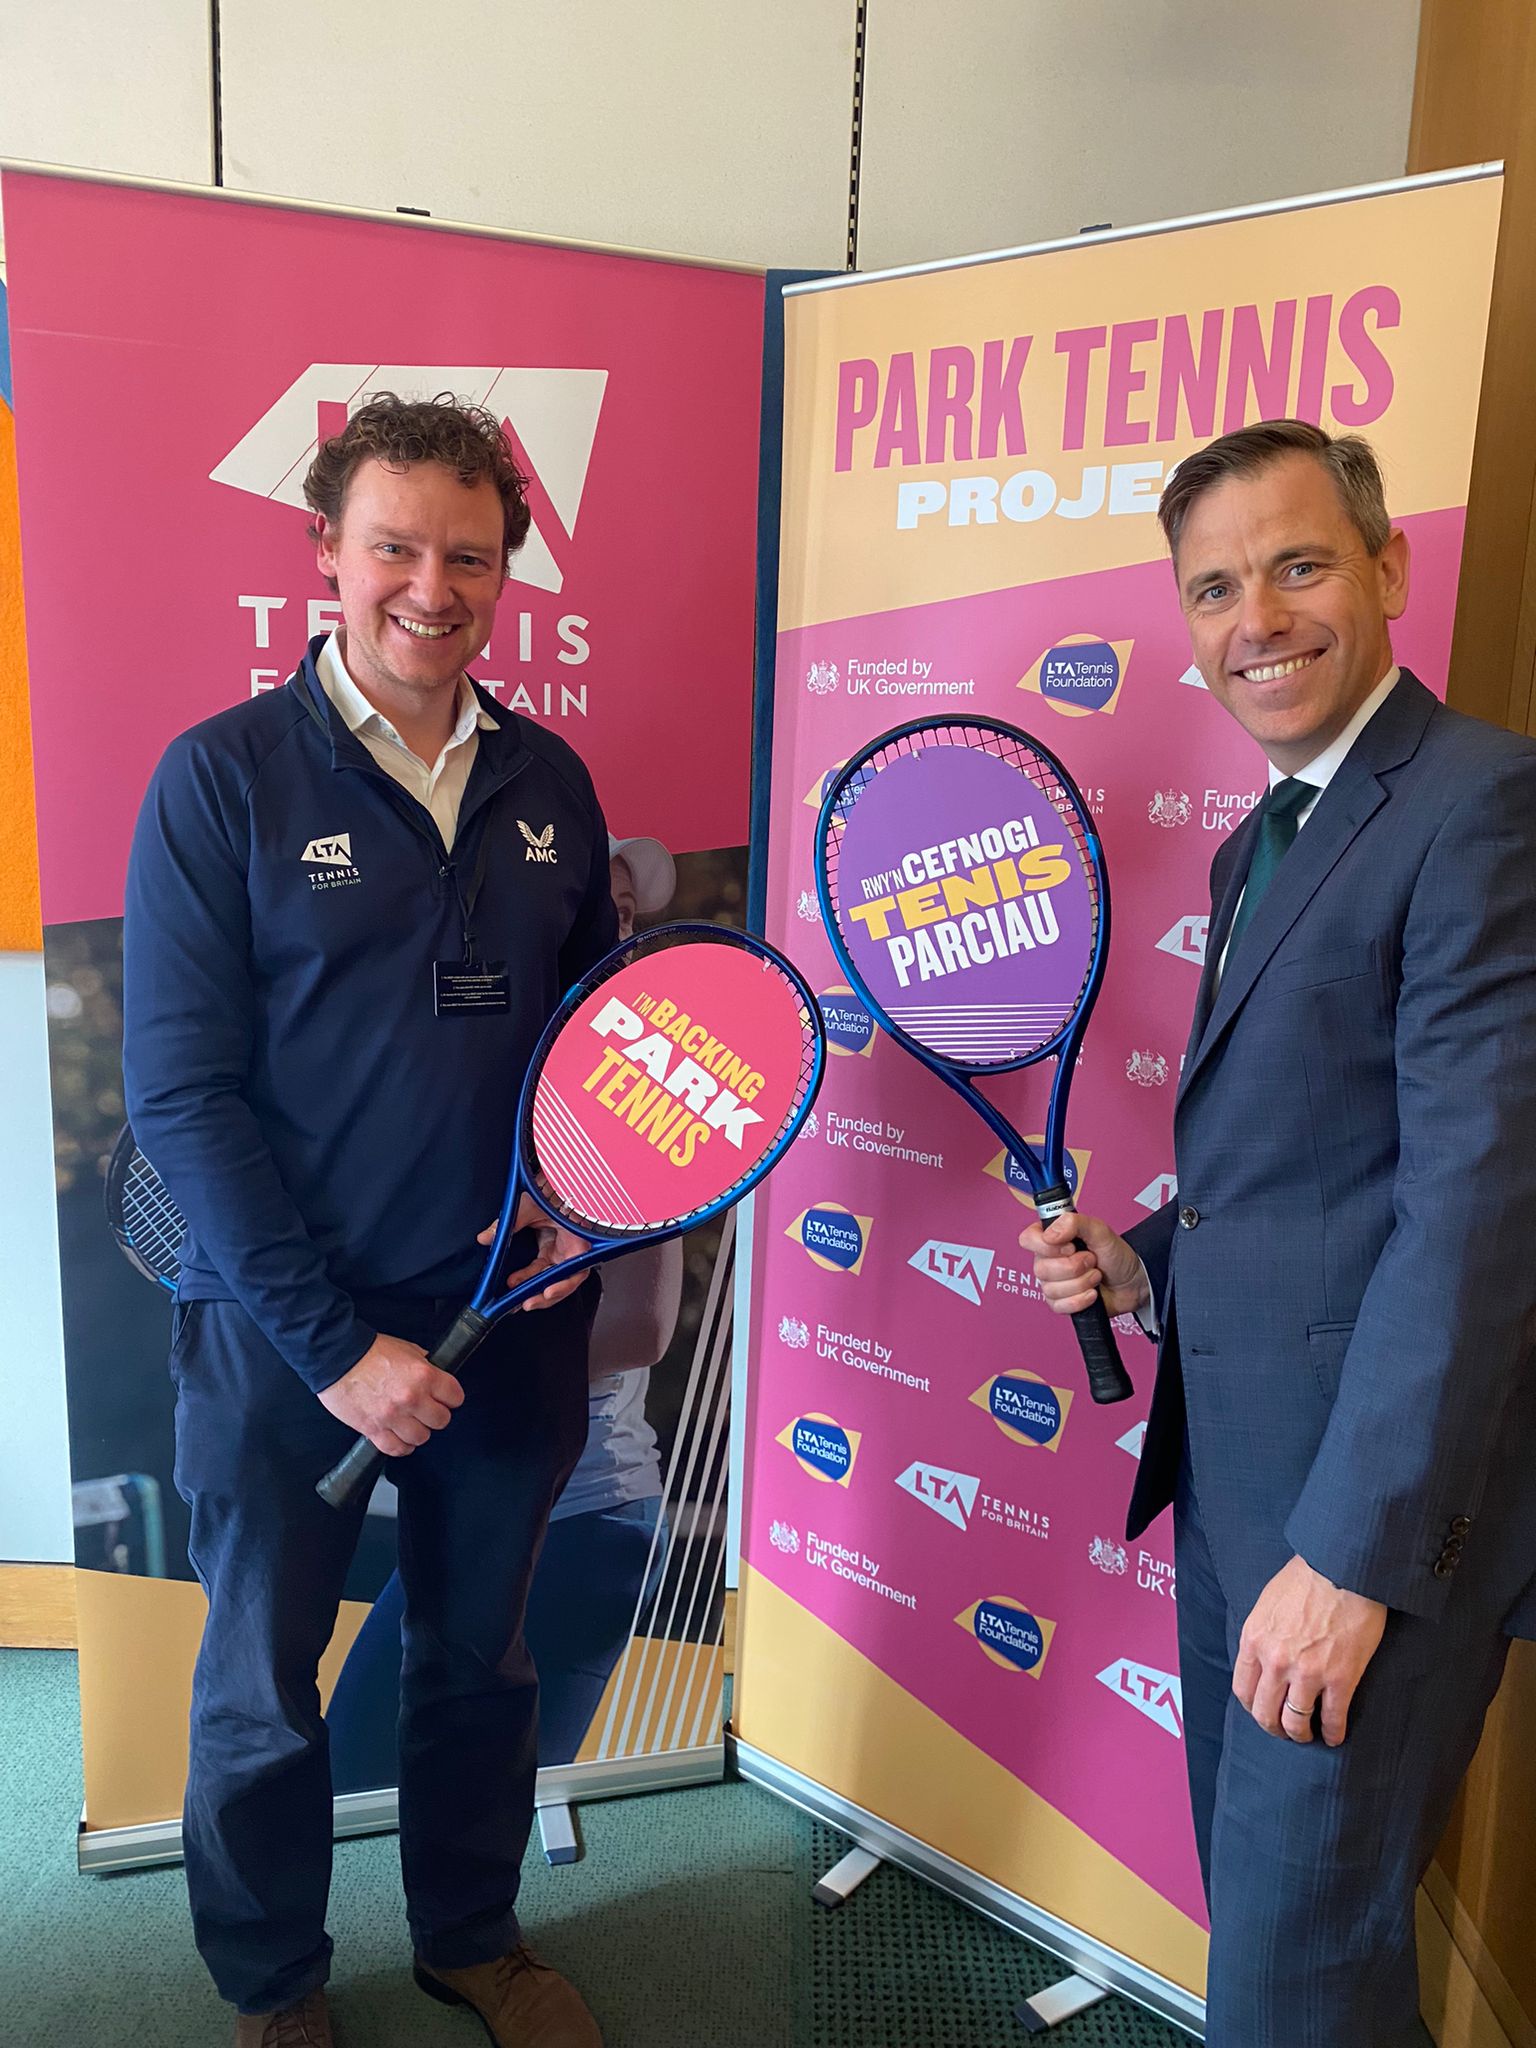 Two Men, including Chris Evans MP, holding tennis rackets that read "I'm backing park tennis"